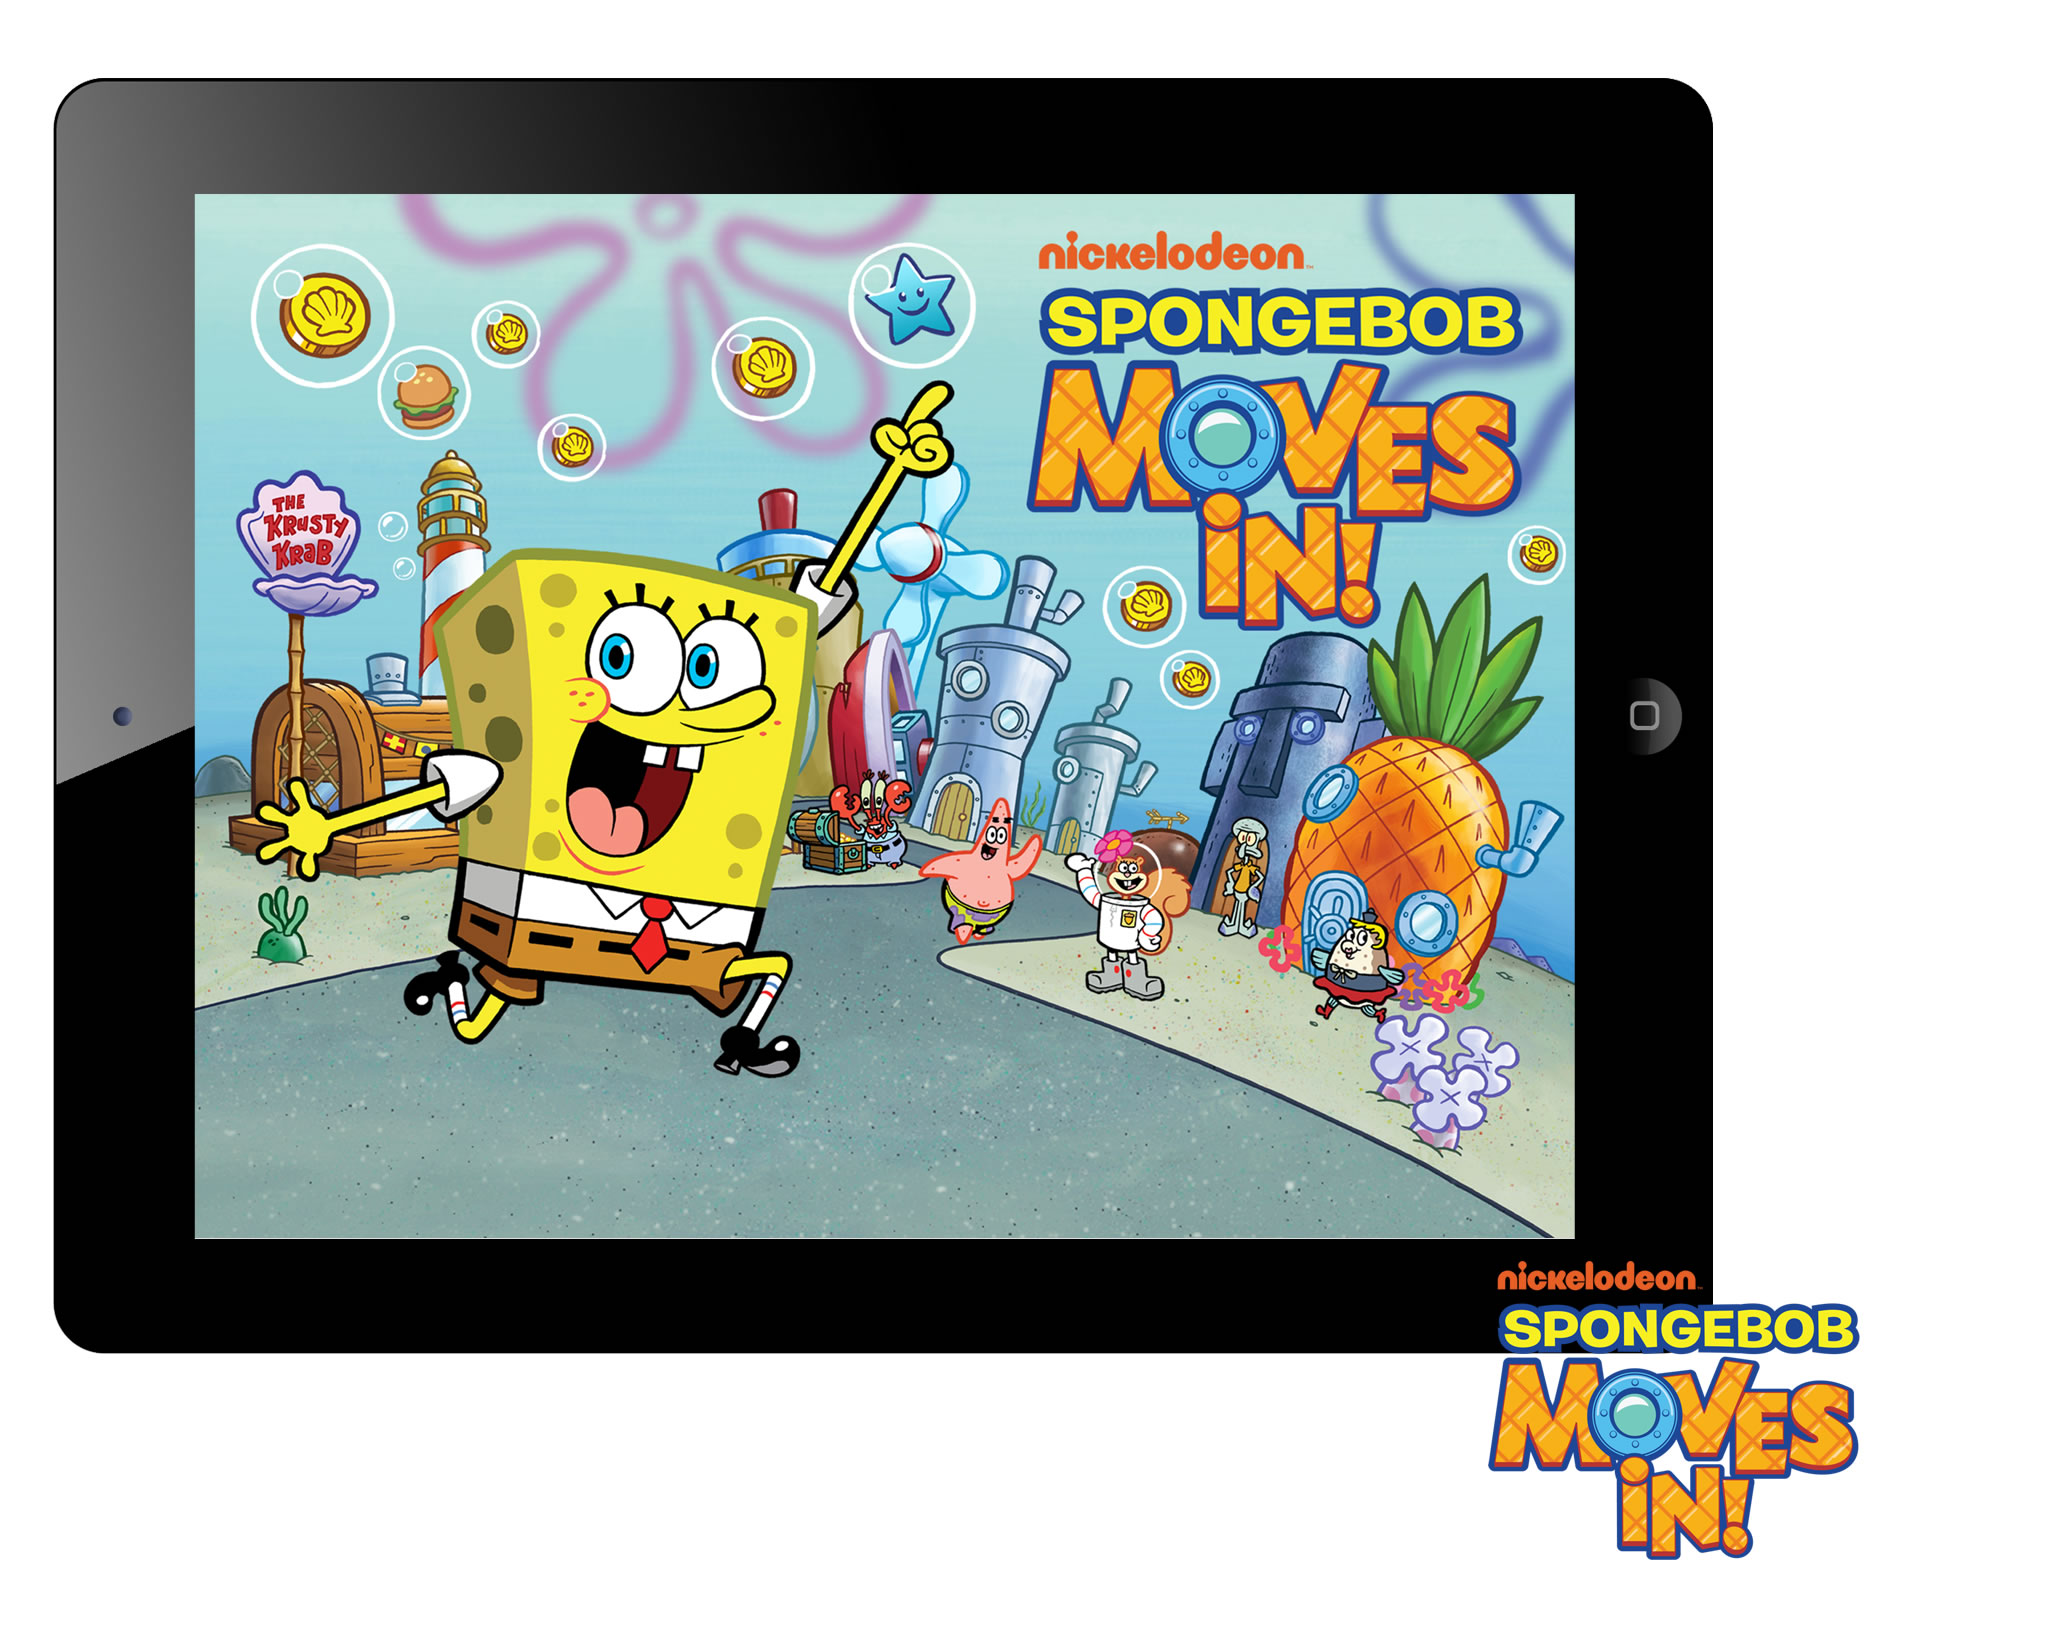 Worldwide Release of The New iOS Game Spongebob Moves In